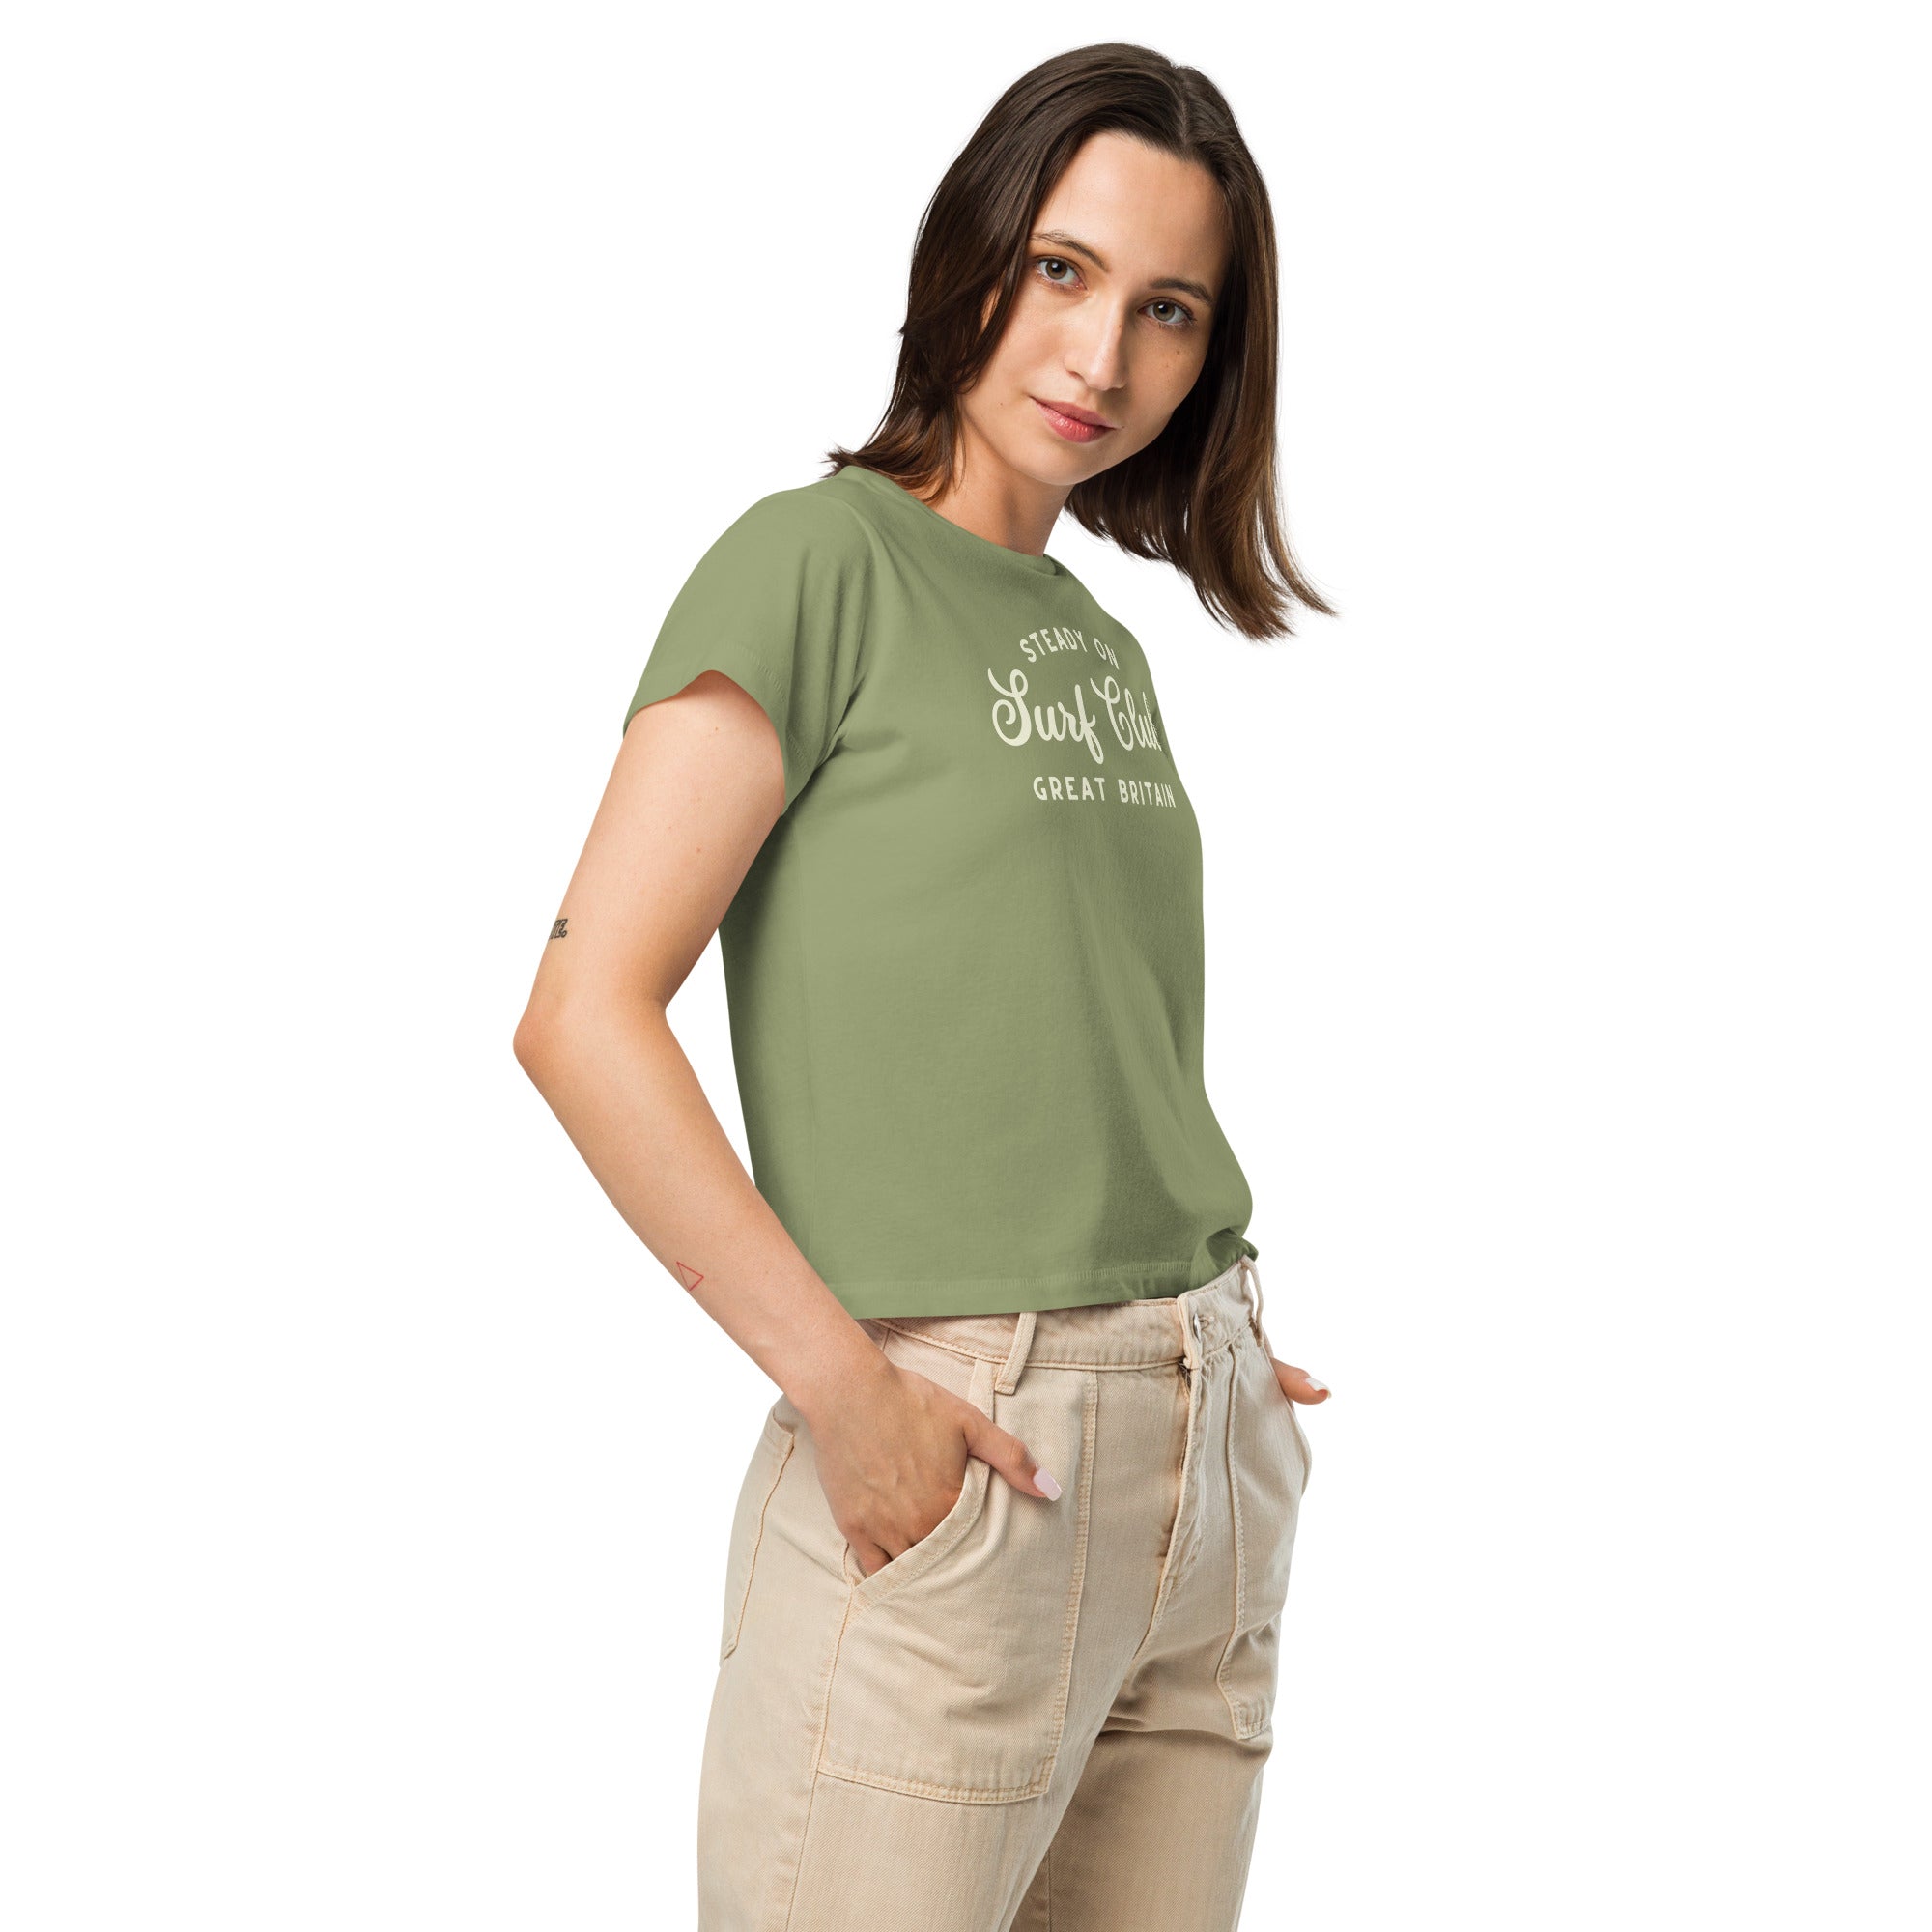 Steady On Surf Club Great Britain | Women’s High-Waisted T-shirt